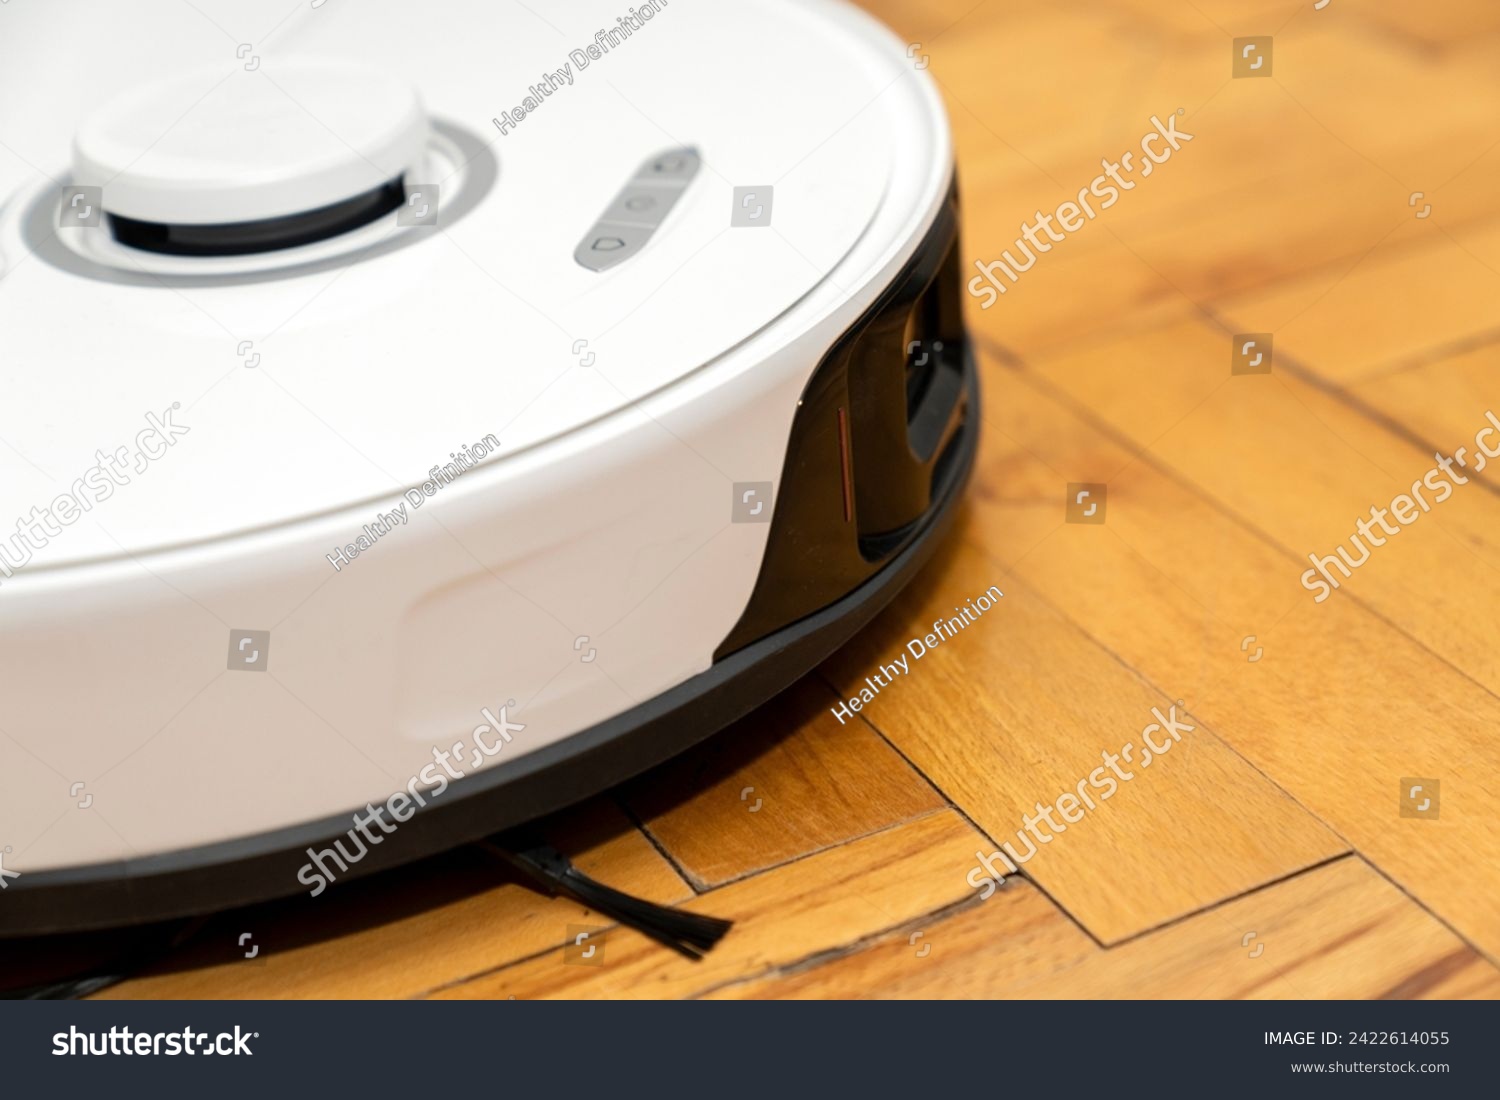 robot vacuum cleaner in modern smart home, robotic vacuum cleaner on wooden or laminate or parquet floor, cleaning dust on tile floors. Modern smart cleaning technology housekeeping. #2422614055